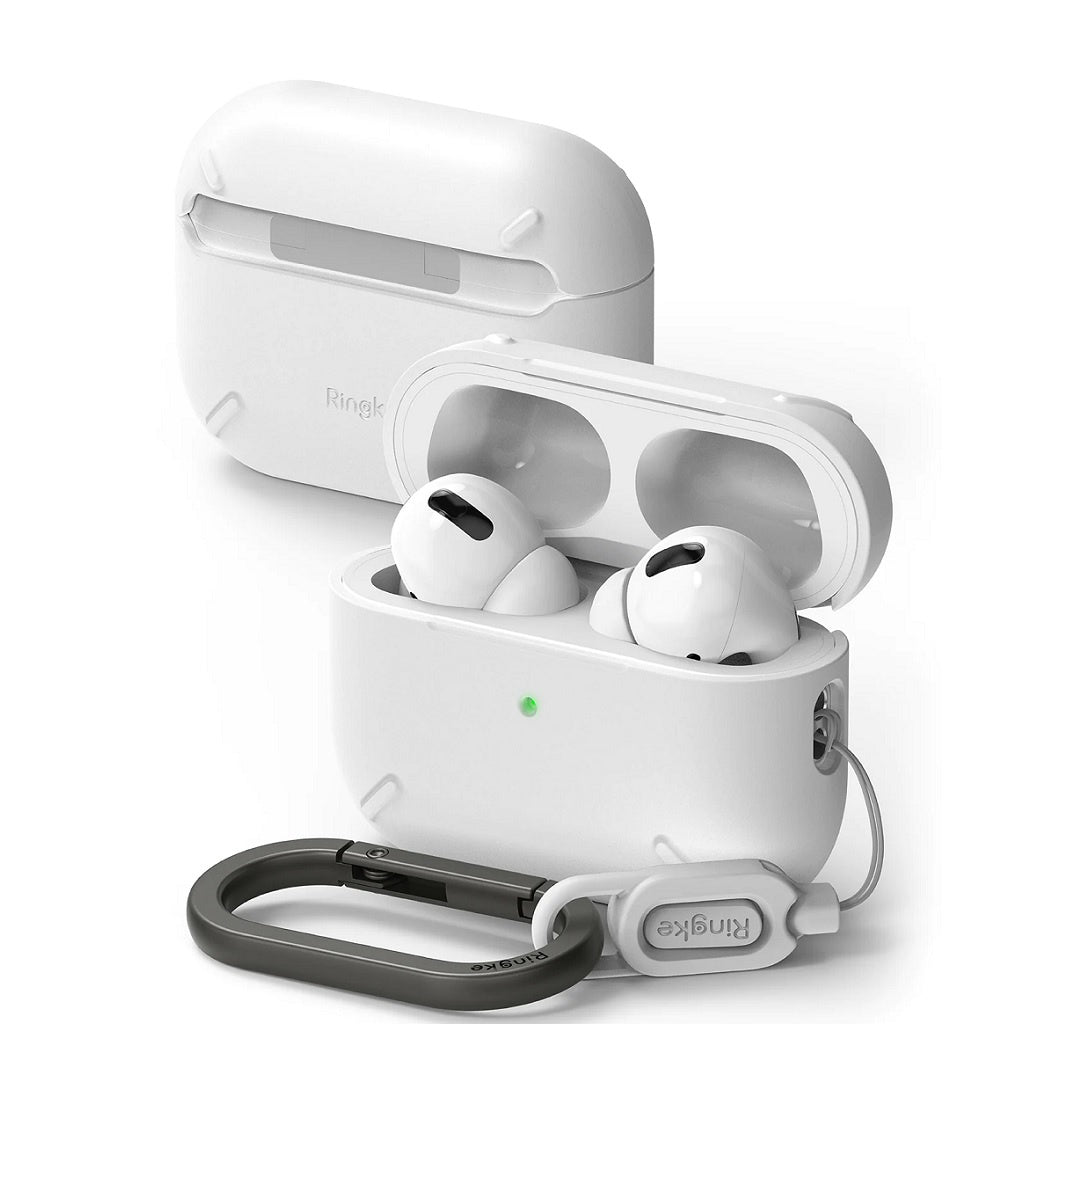 Apple AirPods Pro (2nd) Layered Case White by Ringke